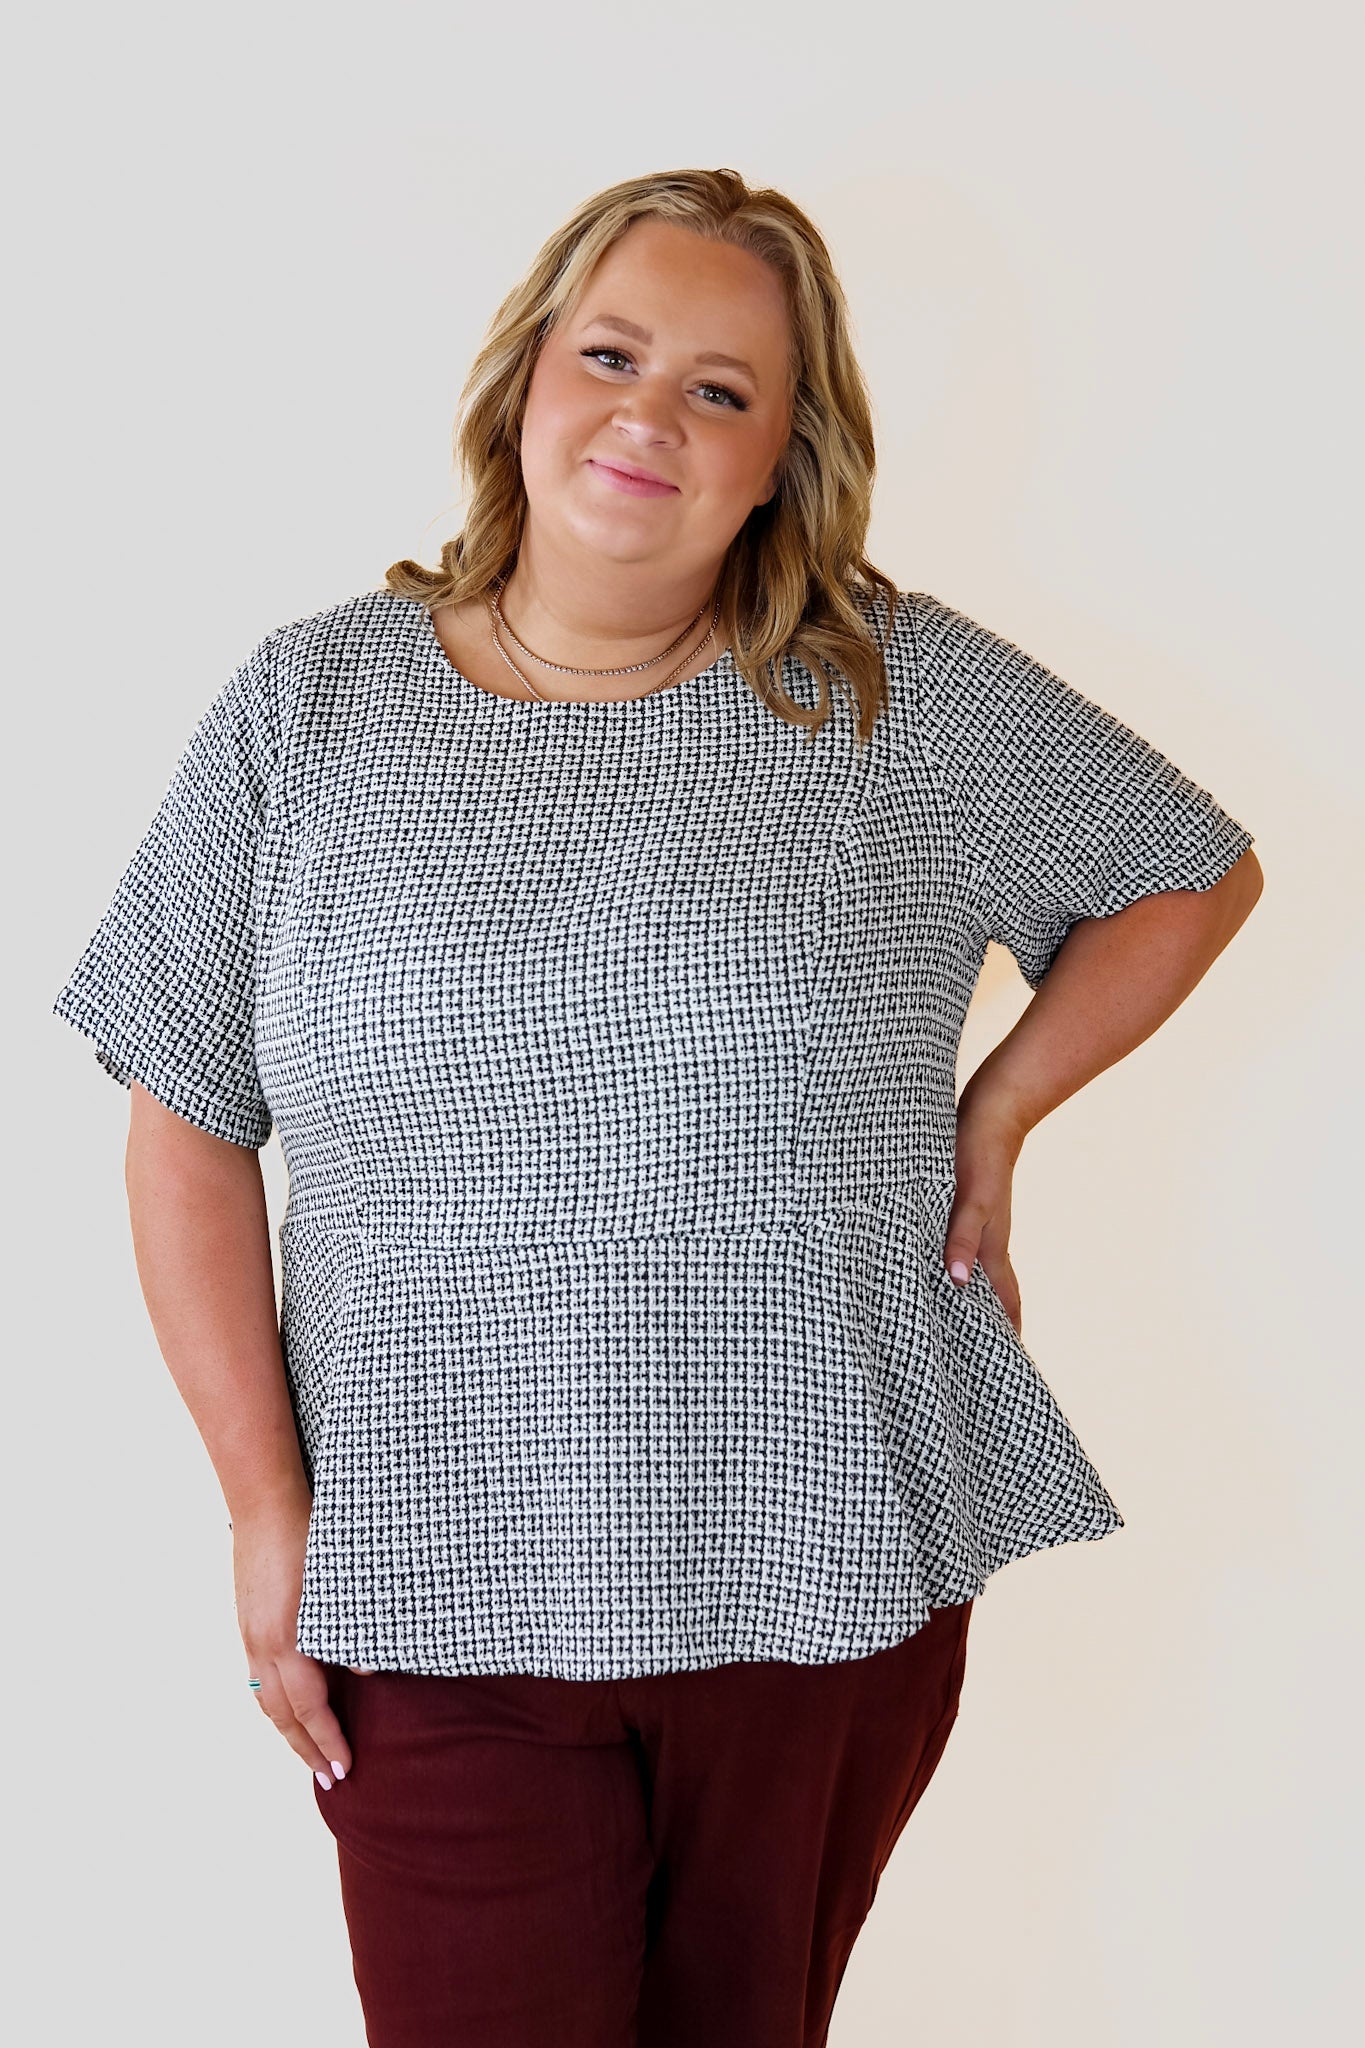 Back and Better Tweed Peplum Top with Short Sleeves in Black and White - Giddy Up Glamour Boutique